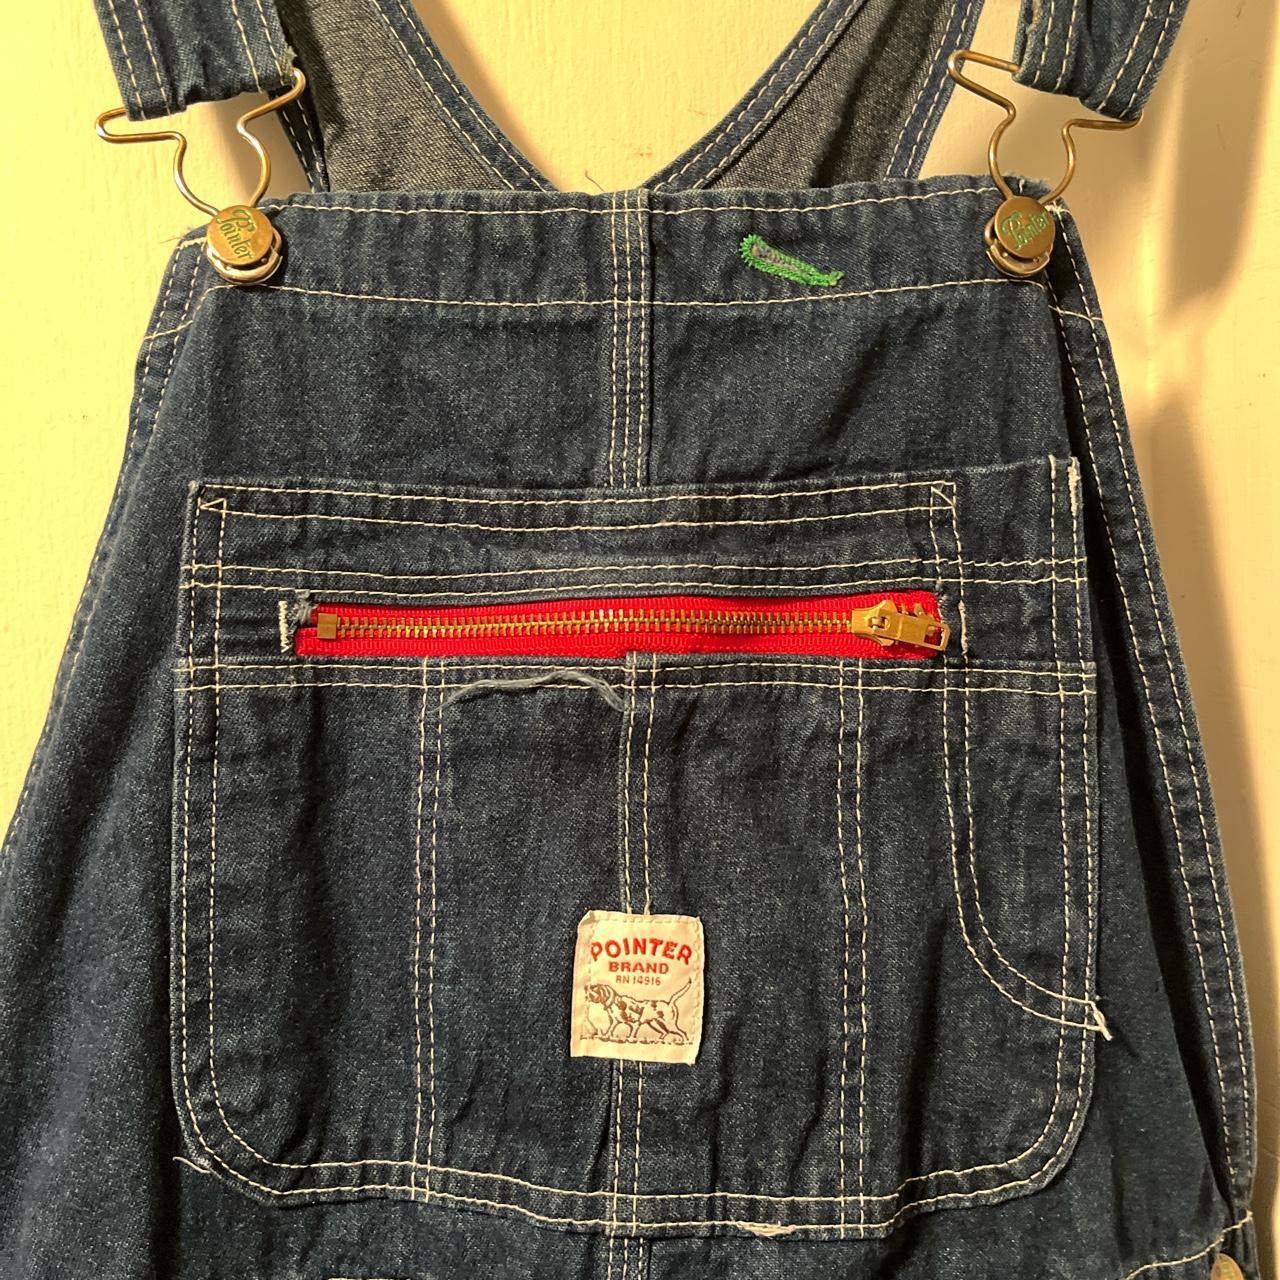 Pointer brand overalls with sweet red zipper detail - Depop